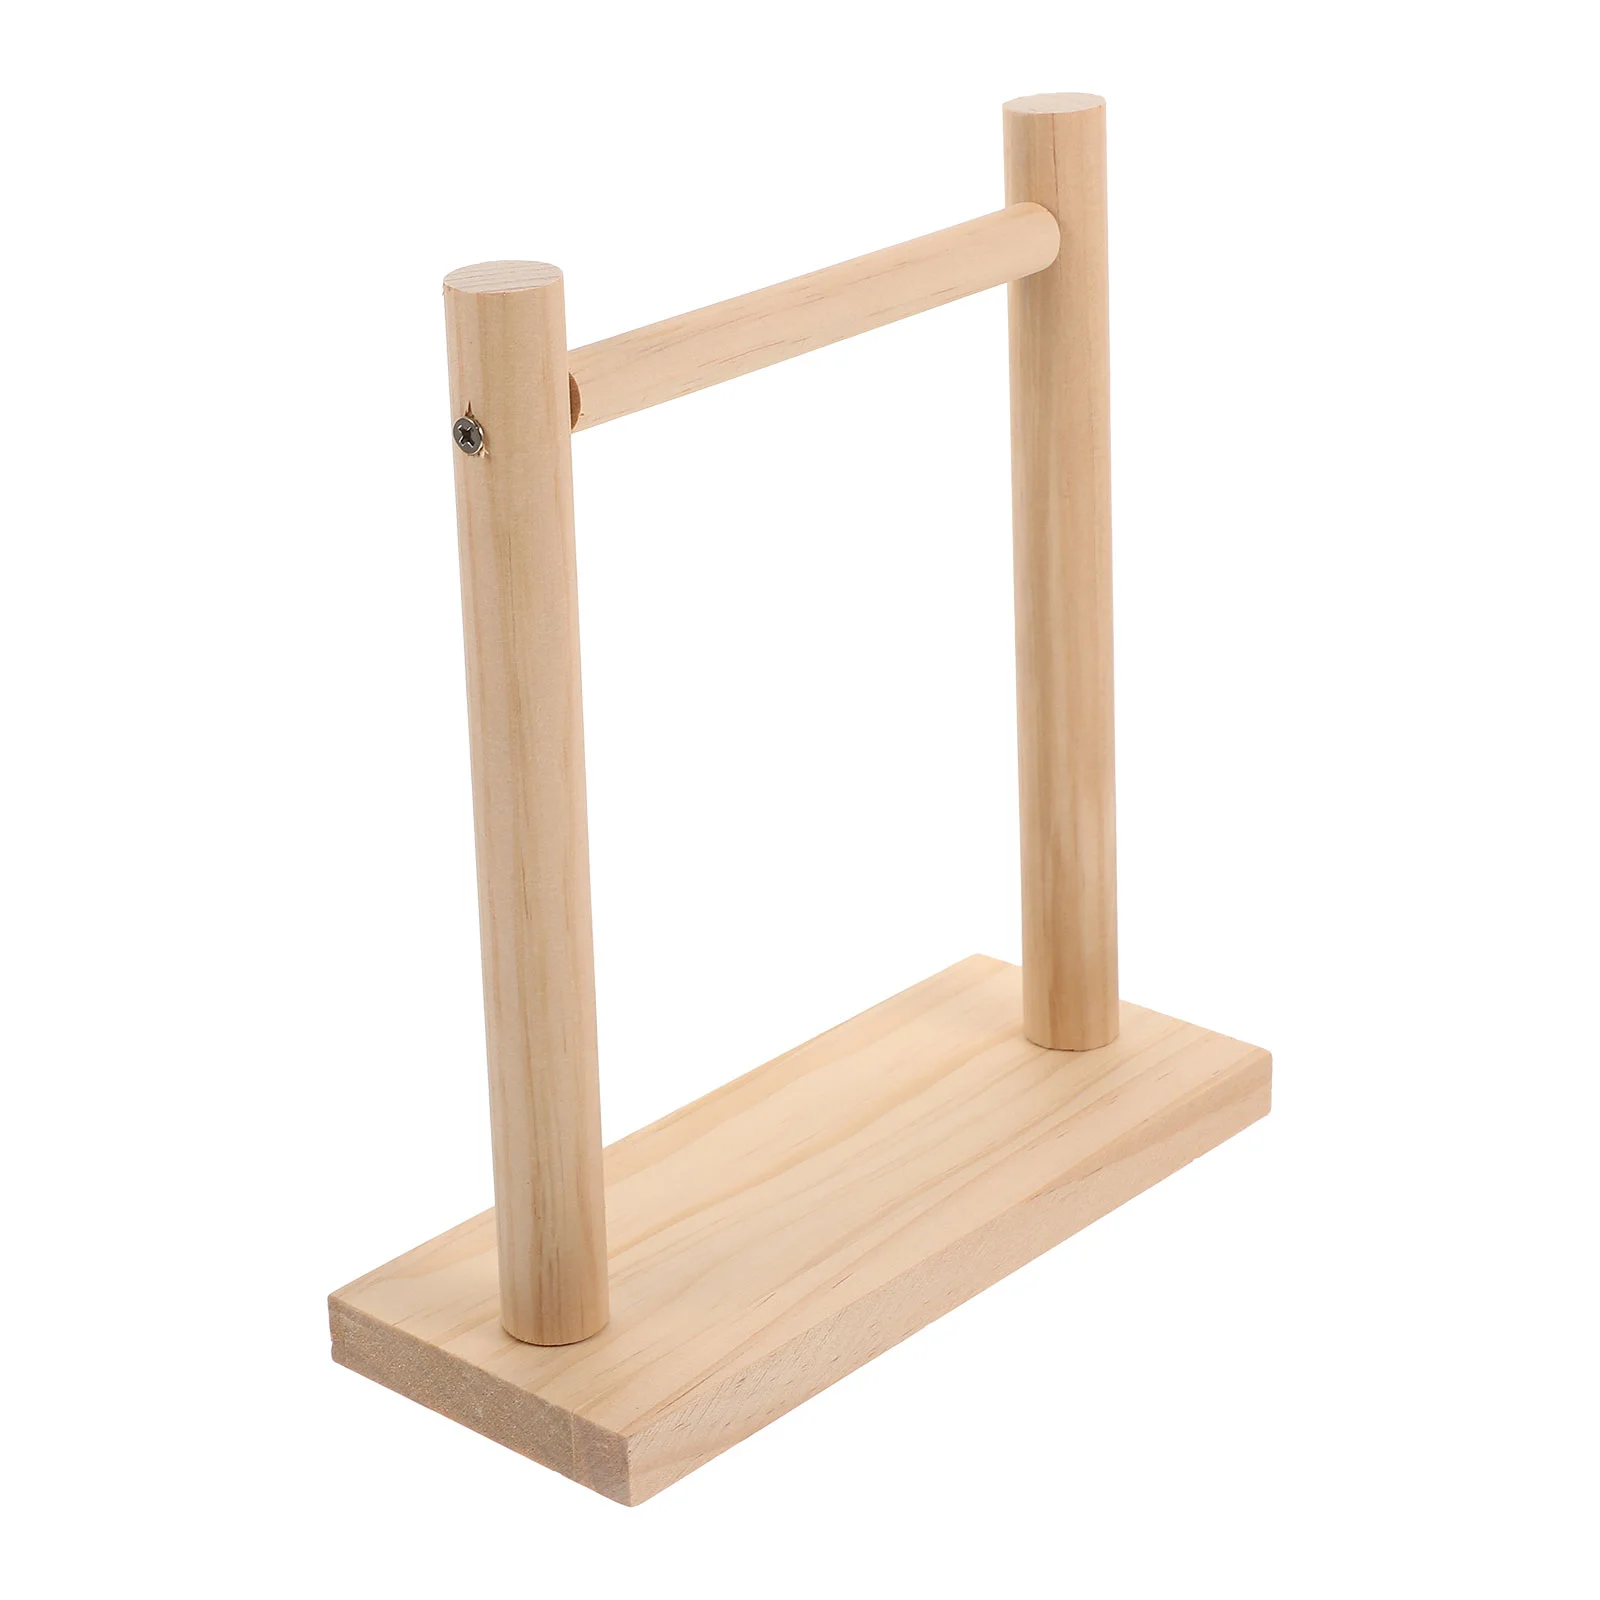 

Bird Stand Parrot Perch Training Cage Toy Toys Wooden Rack Tabletop Rod Cockatiel Play Tearing Wood Standing Base Stable